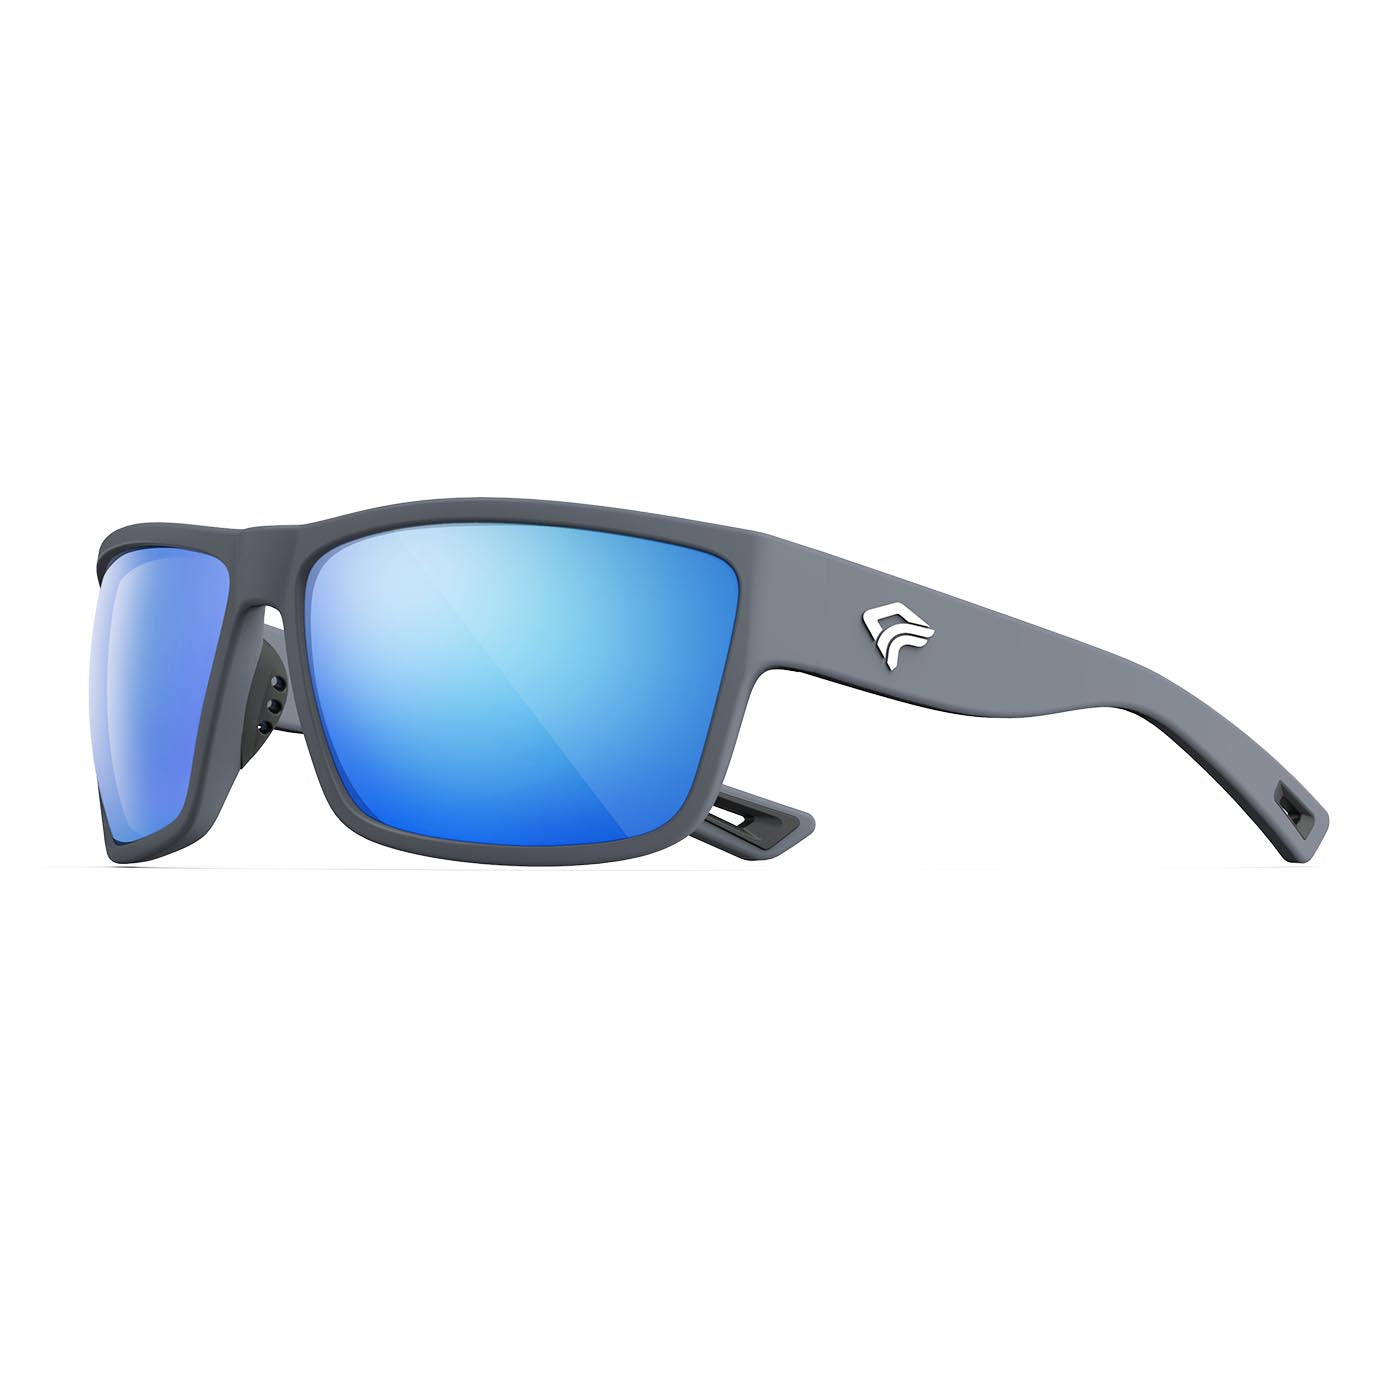 Grey Golf, Running, Half Men Pure - and - Ideal Cycling, Lifetime for Frame - Women Flexible Fishing Ideal with To Transparent Sunglasses for and - and Sports Matte Warranty Adjustable Polarized